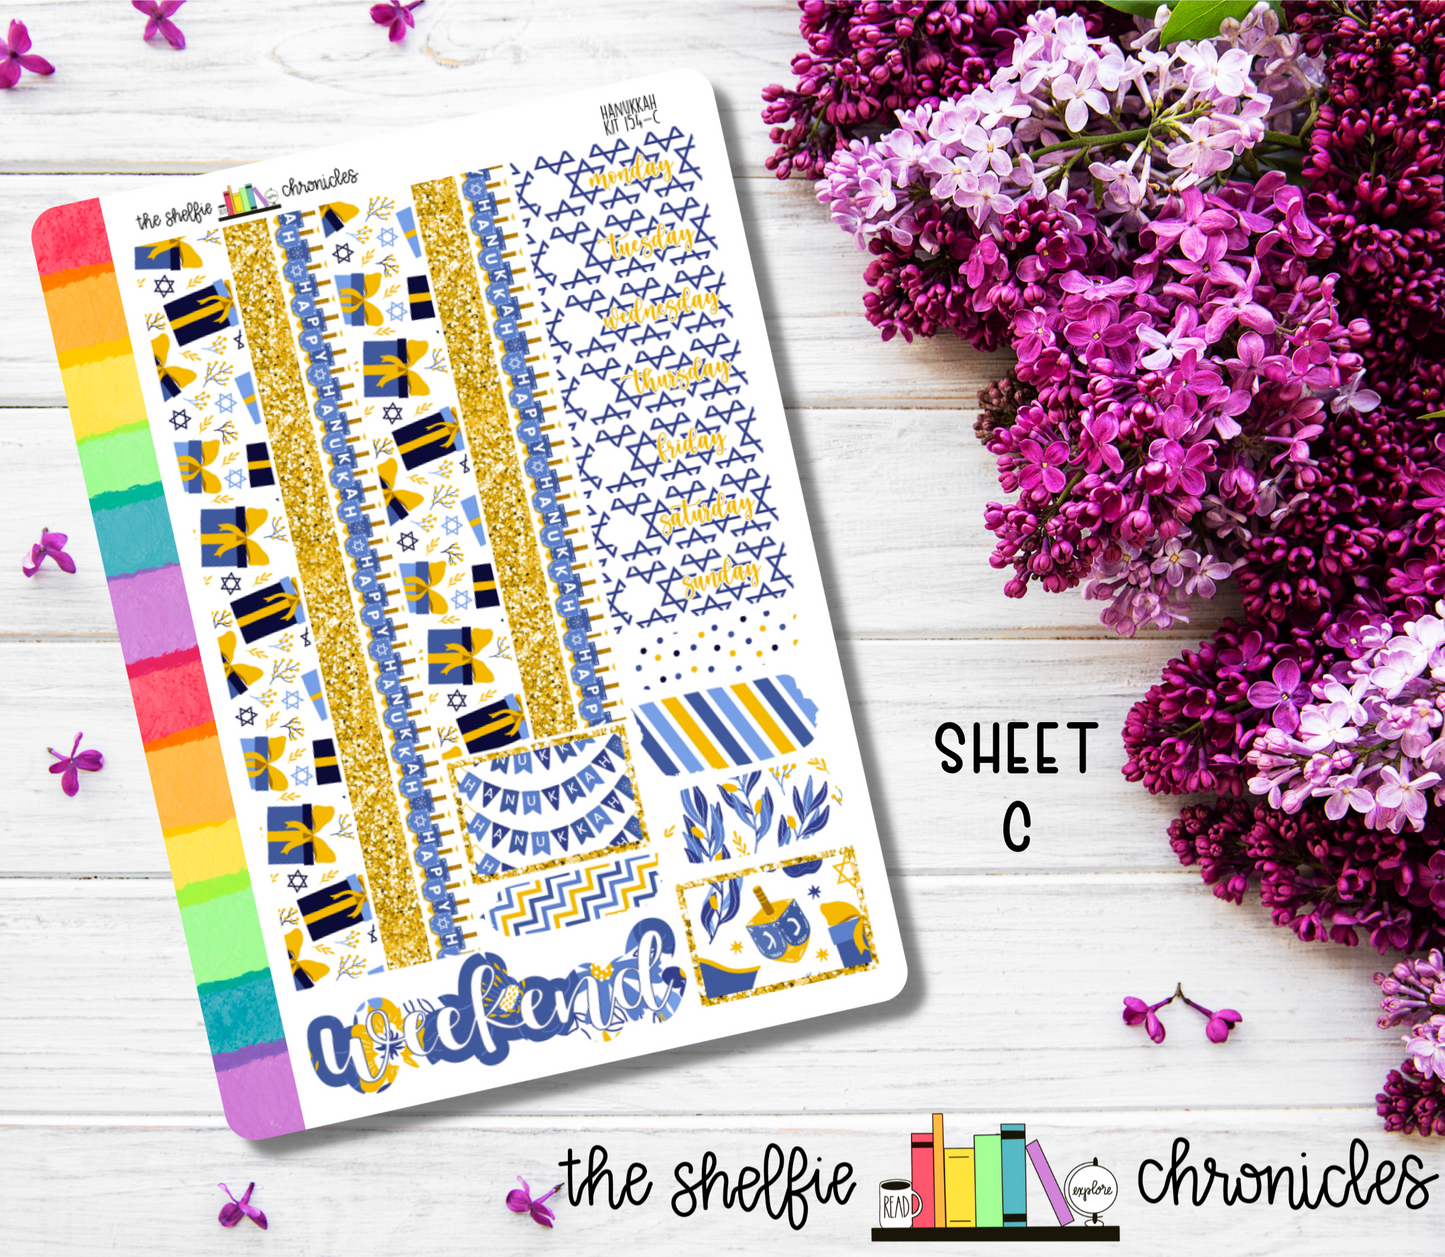 Kit 154 - Hanukkah Weekly Kit - Die Cut Stickers - Repositionable Paper - Made To Fit 7x9 Planners